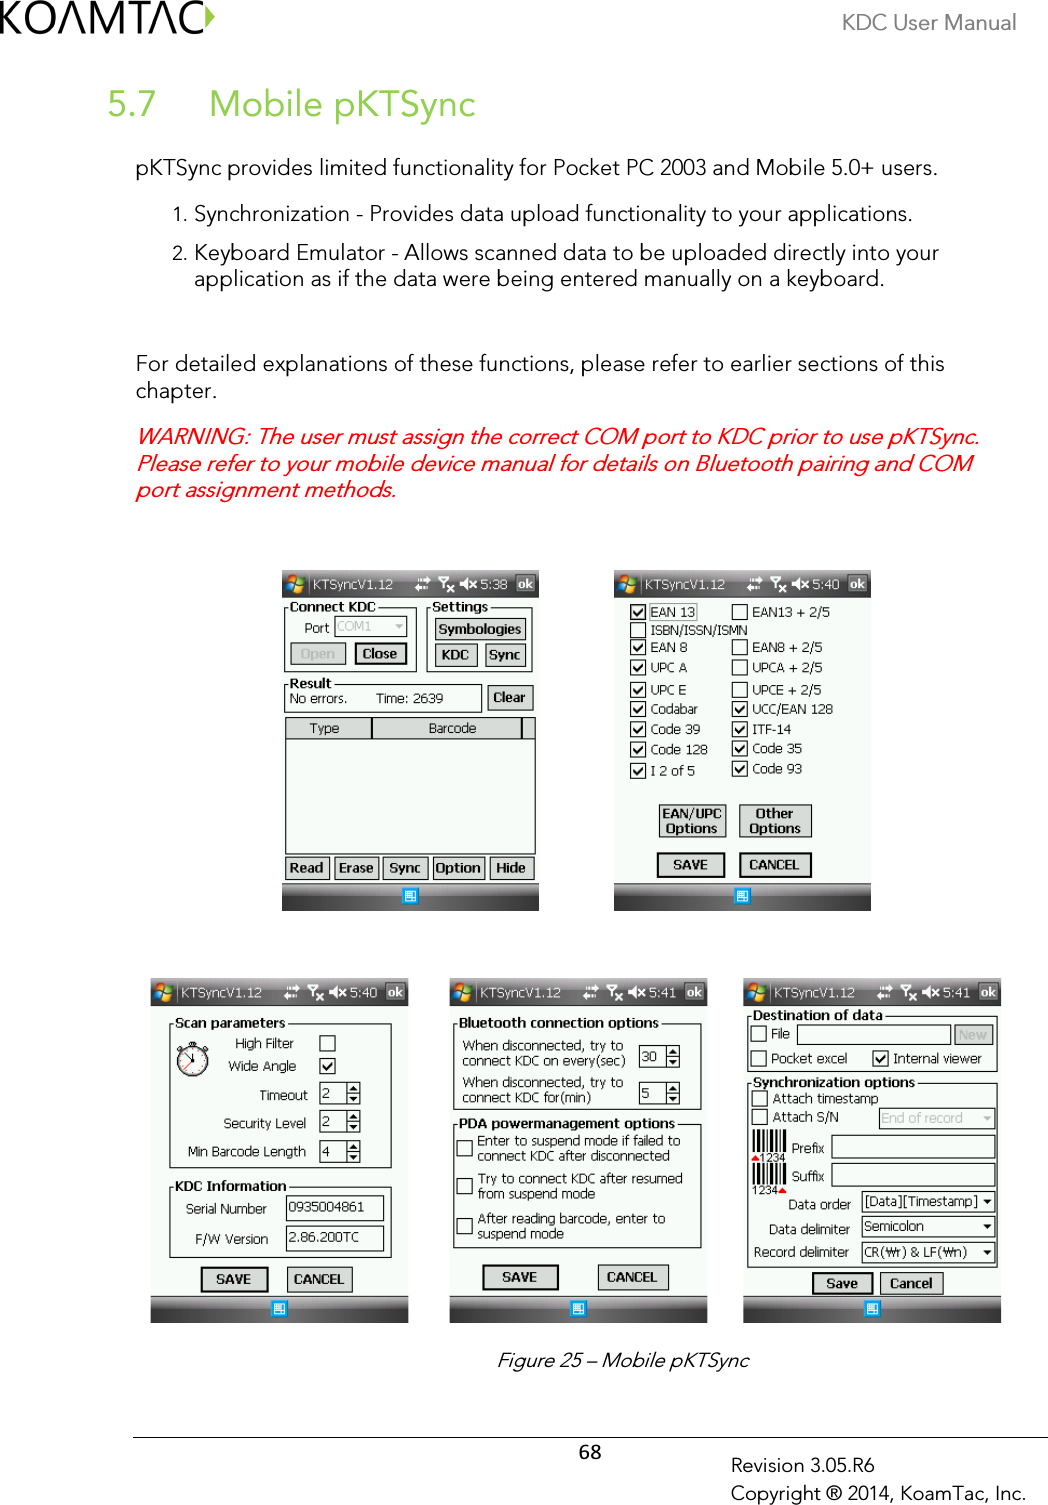 KDC User Manual  68 Revision 3.05.R6 Copyright ® 2014, KoamTac, Inc.  Mobile pKTSync 5.7 pKTSync provides limited functionality for Pocket PC 2003 and Mobile 5.0+ users. 1. Synchronization - Provides data upload functionality to your applications. 2. Keyboard Emulator - Allows scanned data to be uploaded directly into your application as if the data were being entered manually on a keyboard.  For detailed explanations of these functions, please refer to earlier sections of this chapter.  WARNING: The user must assign the correct COM port to KDC prior to use pKTSync. Please refer to your mobile device manual for details on Bluetooth pairing and COM port assignment methods.                                       Figure 25 – Mobile pKTSync 